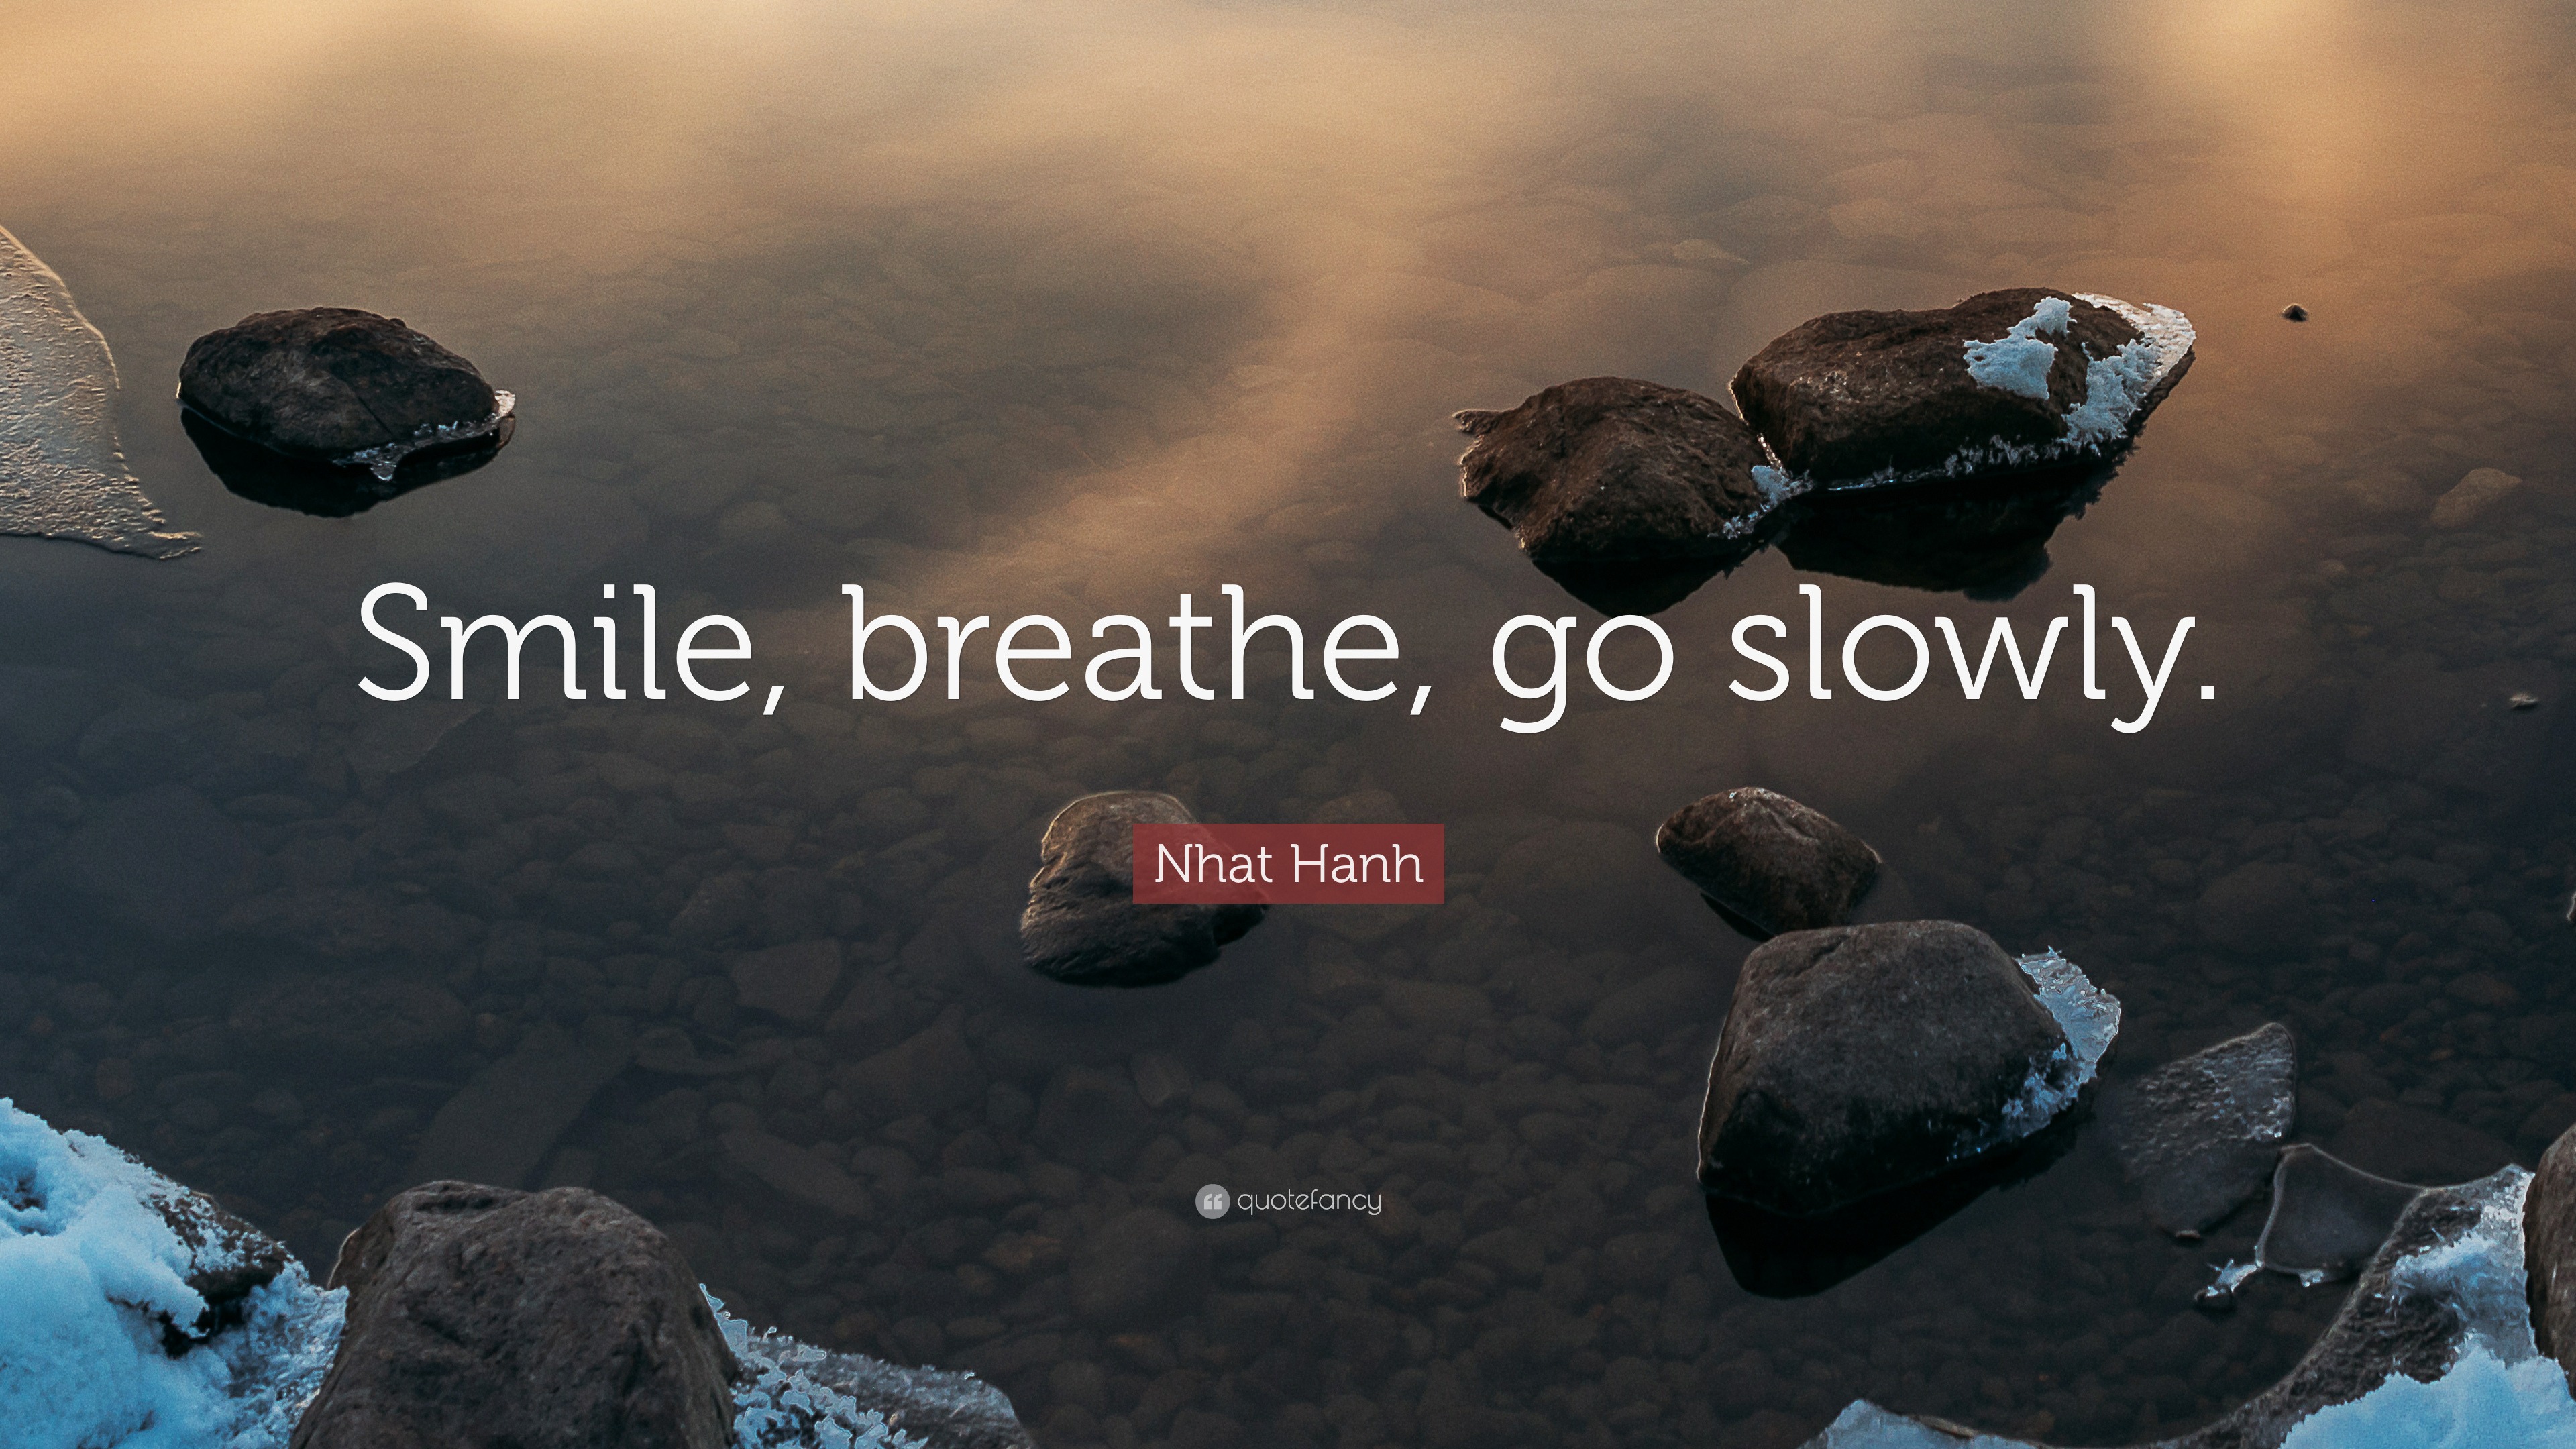 Project Happiness - Smile, breathe and go slowly.~Thich Nhat Hanh  #SundaySoul Challenge: In today's world, we're good at going fast and need  to practice going slow. This is why soulful practices, like